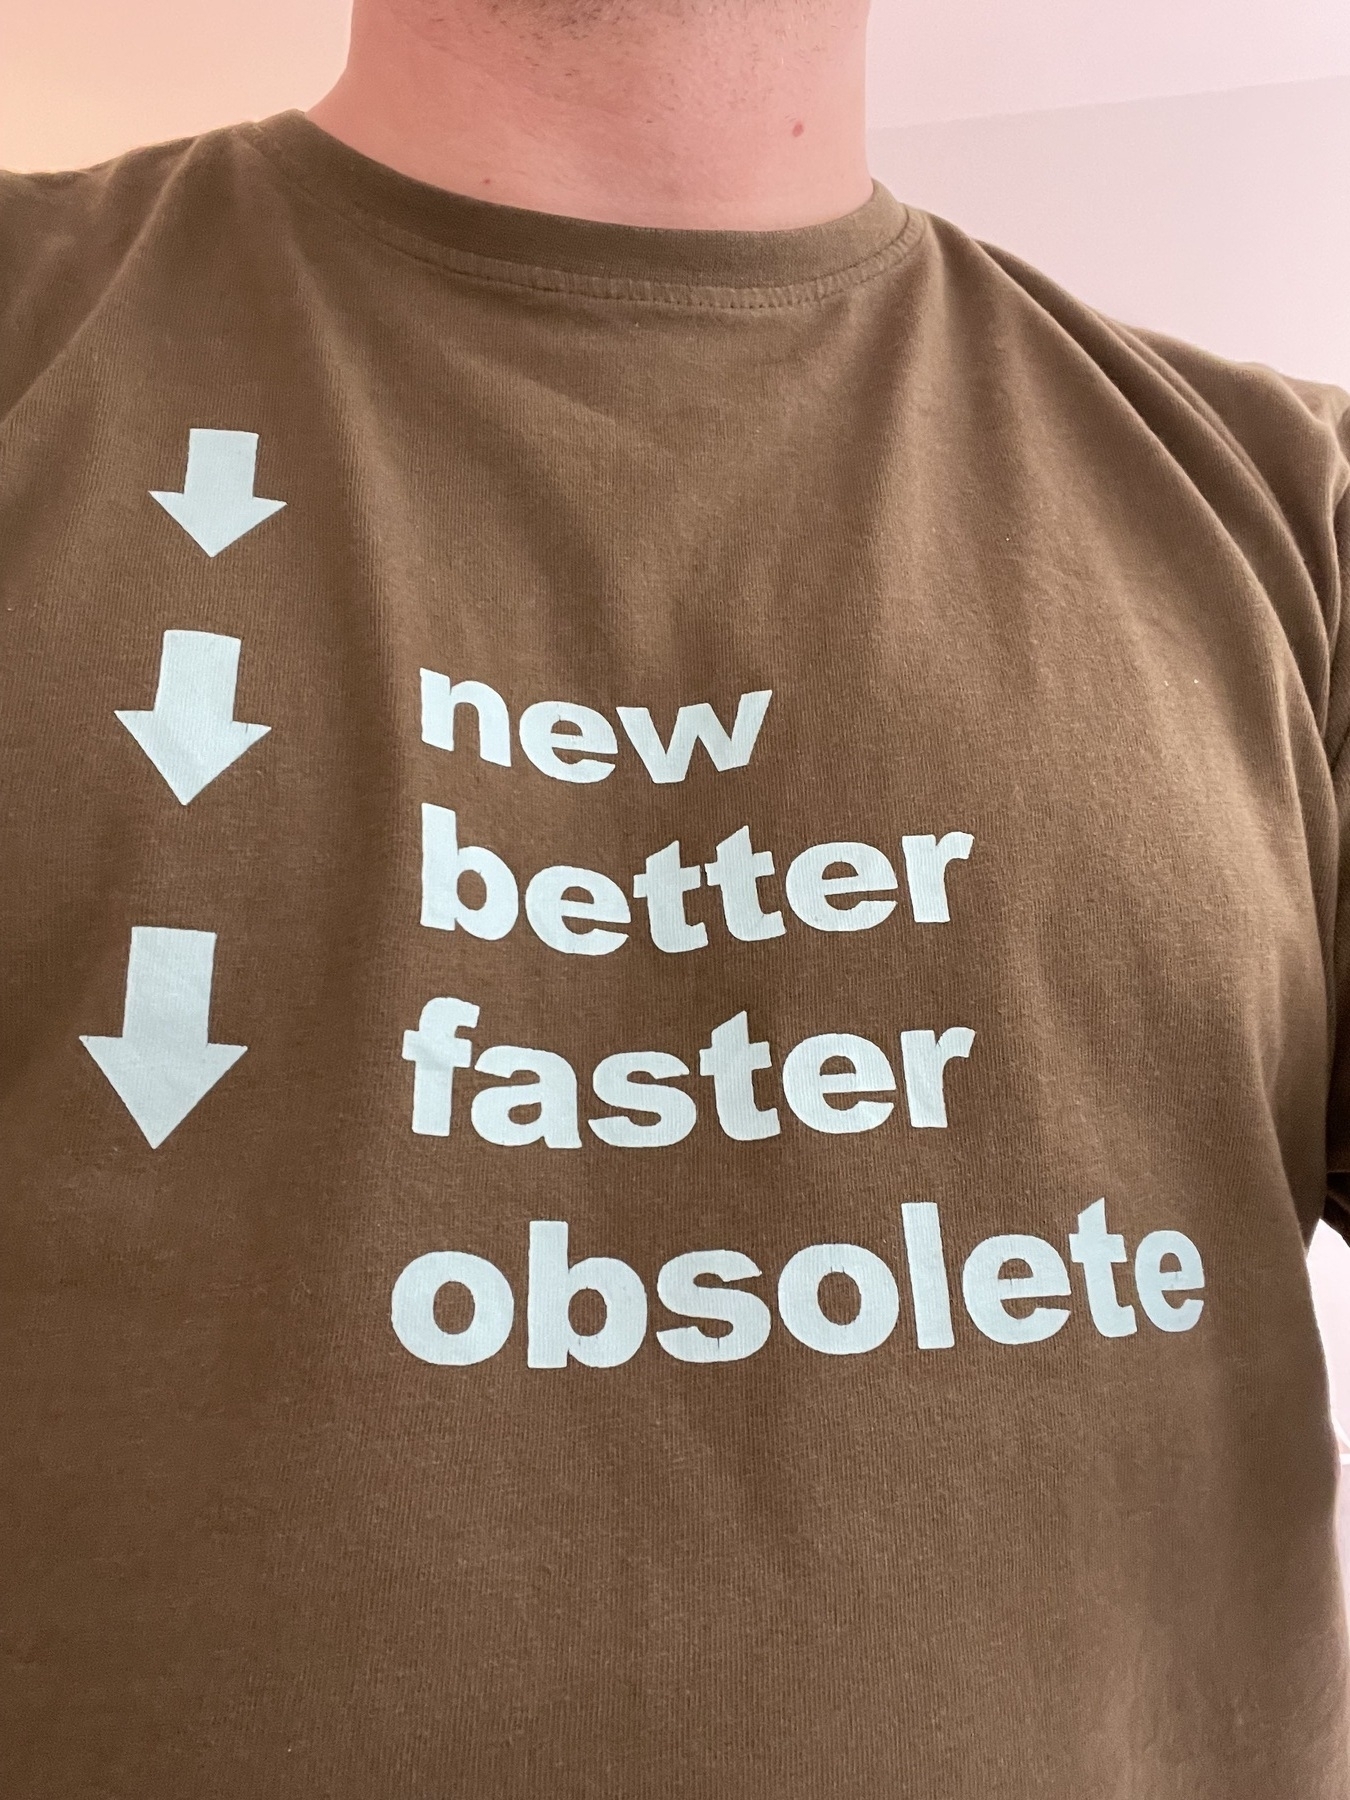 Today's t-shirt #Apple #AppleEvent @tim_cook